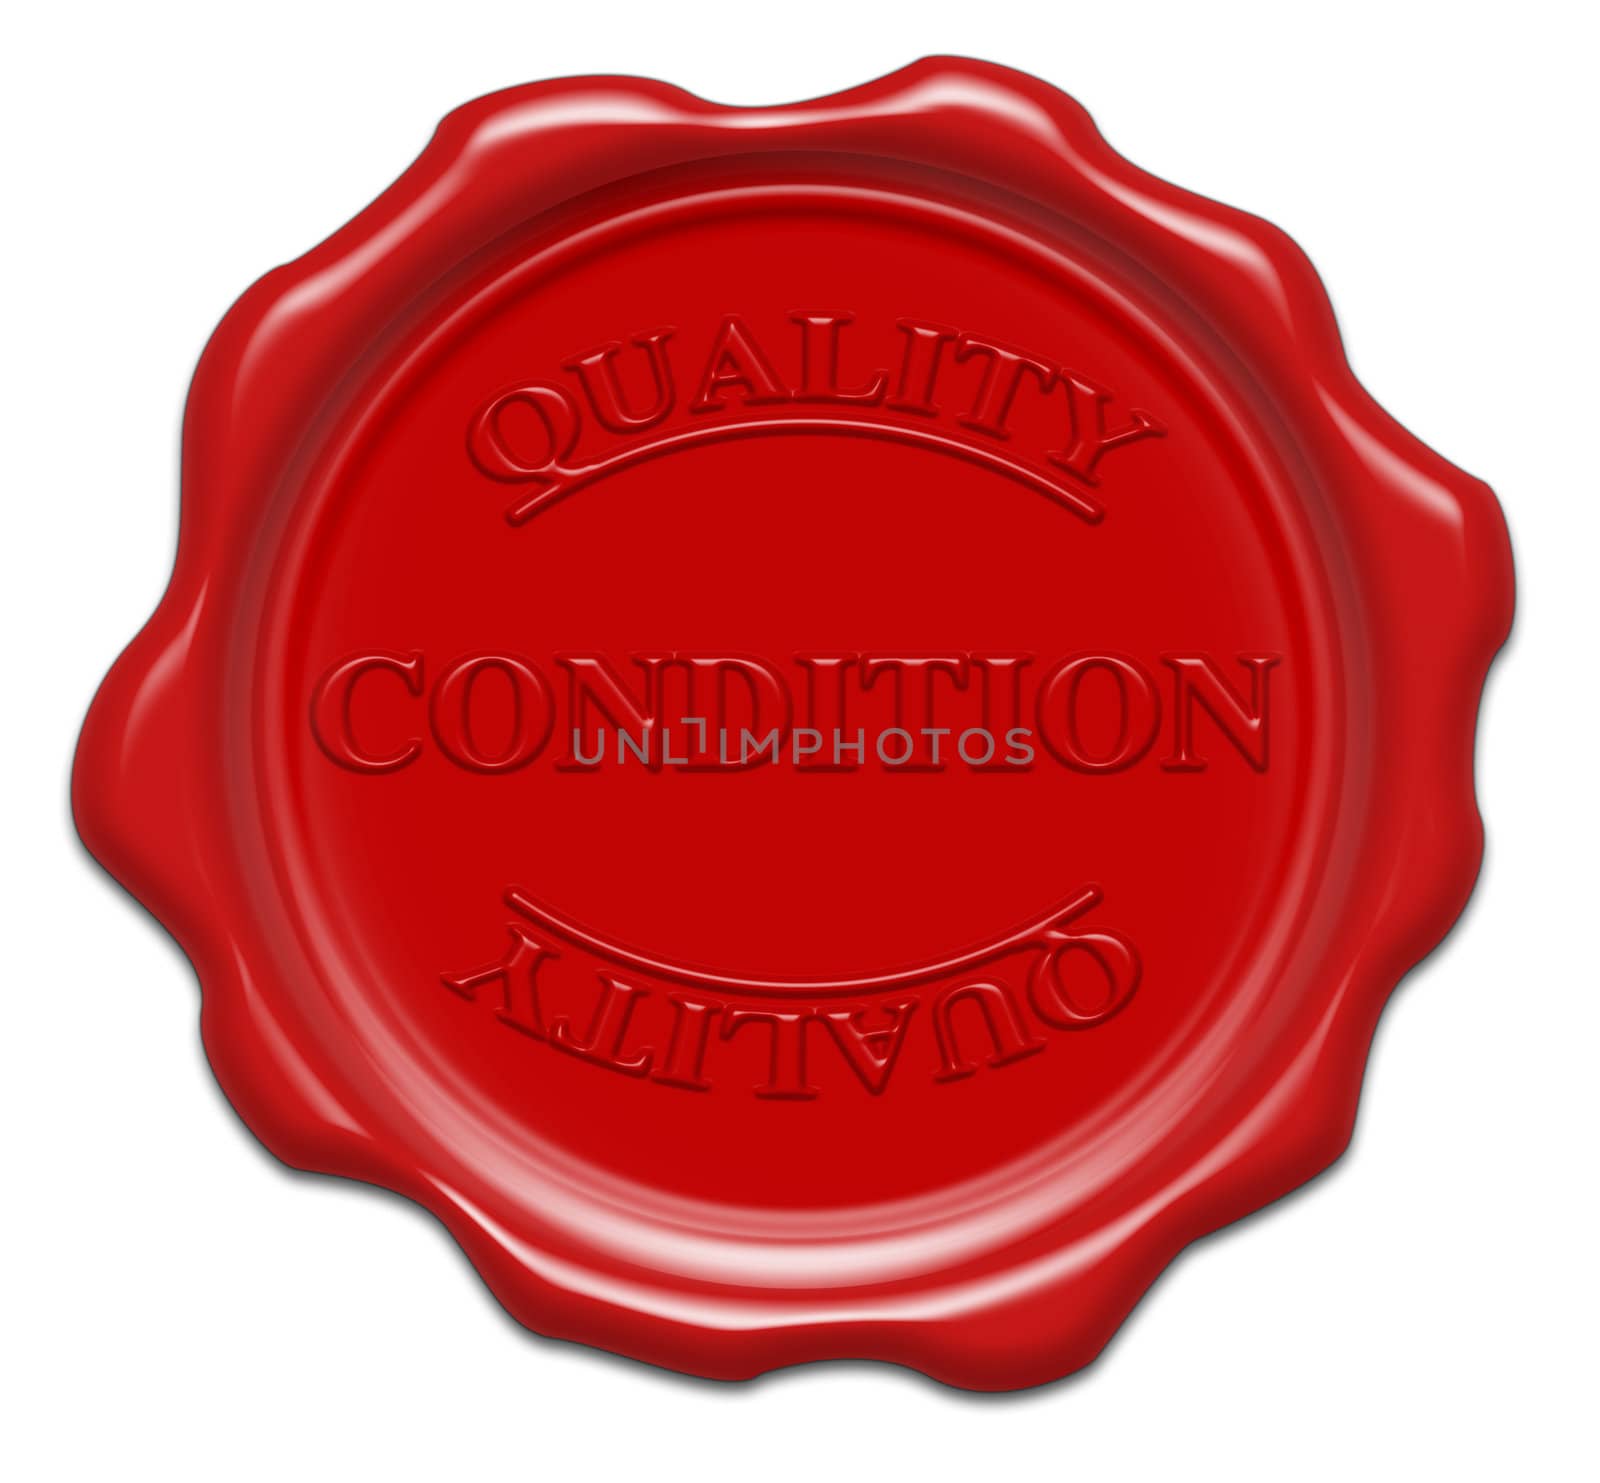 quality condition - illustration red wax seal isolated on white background with word : condition